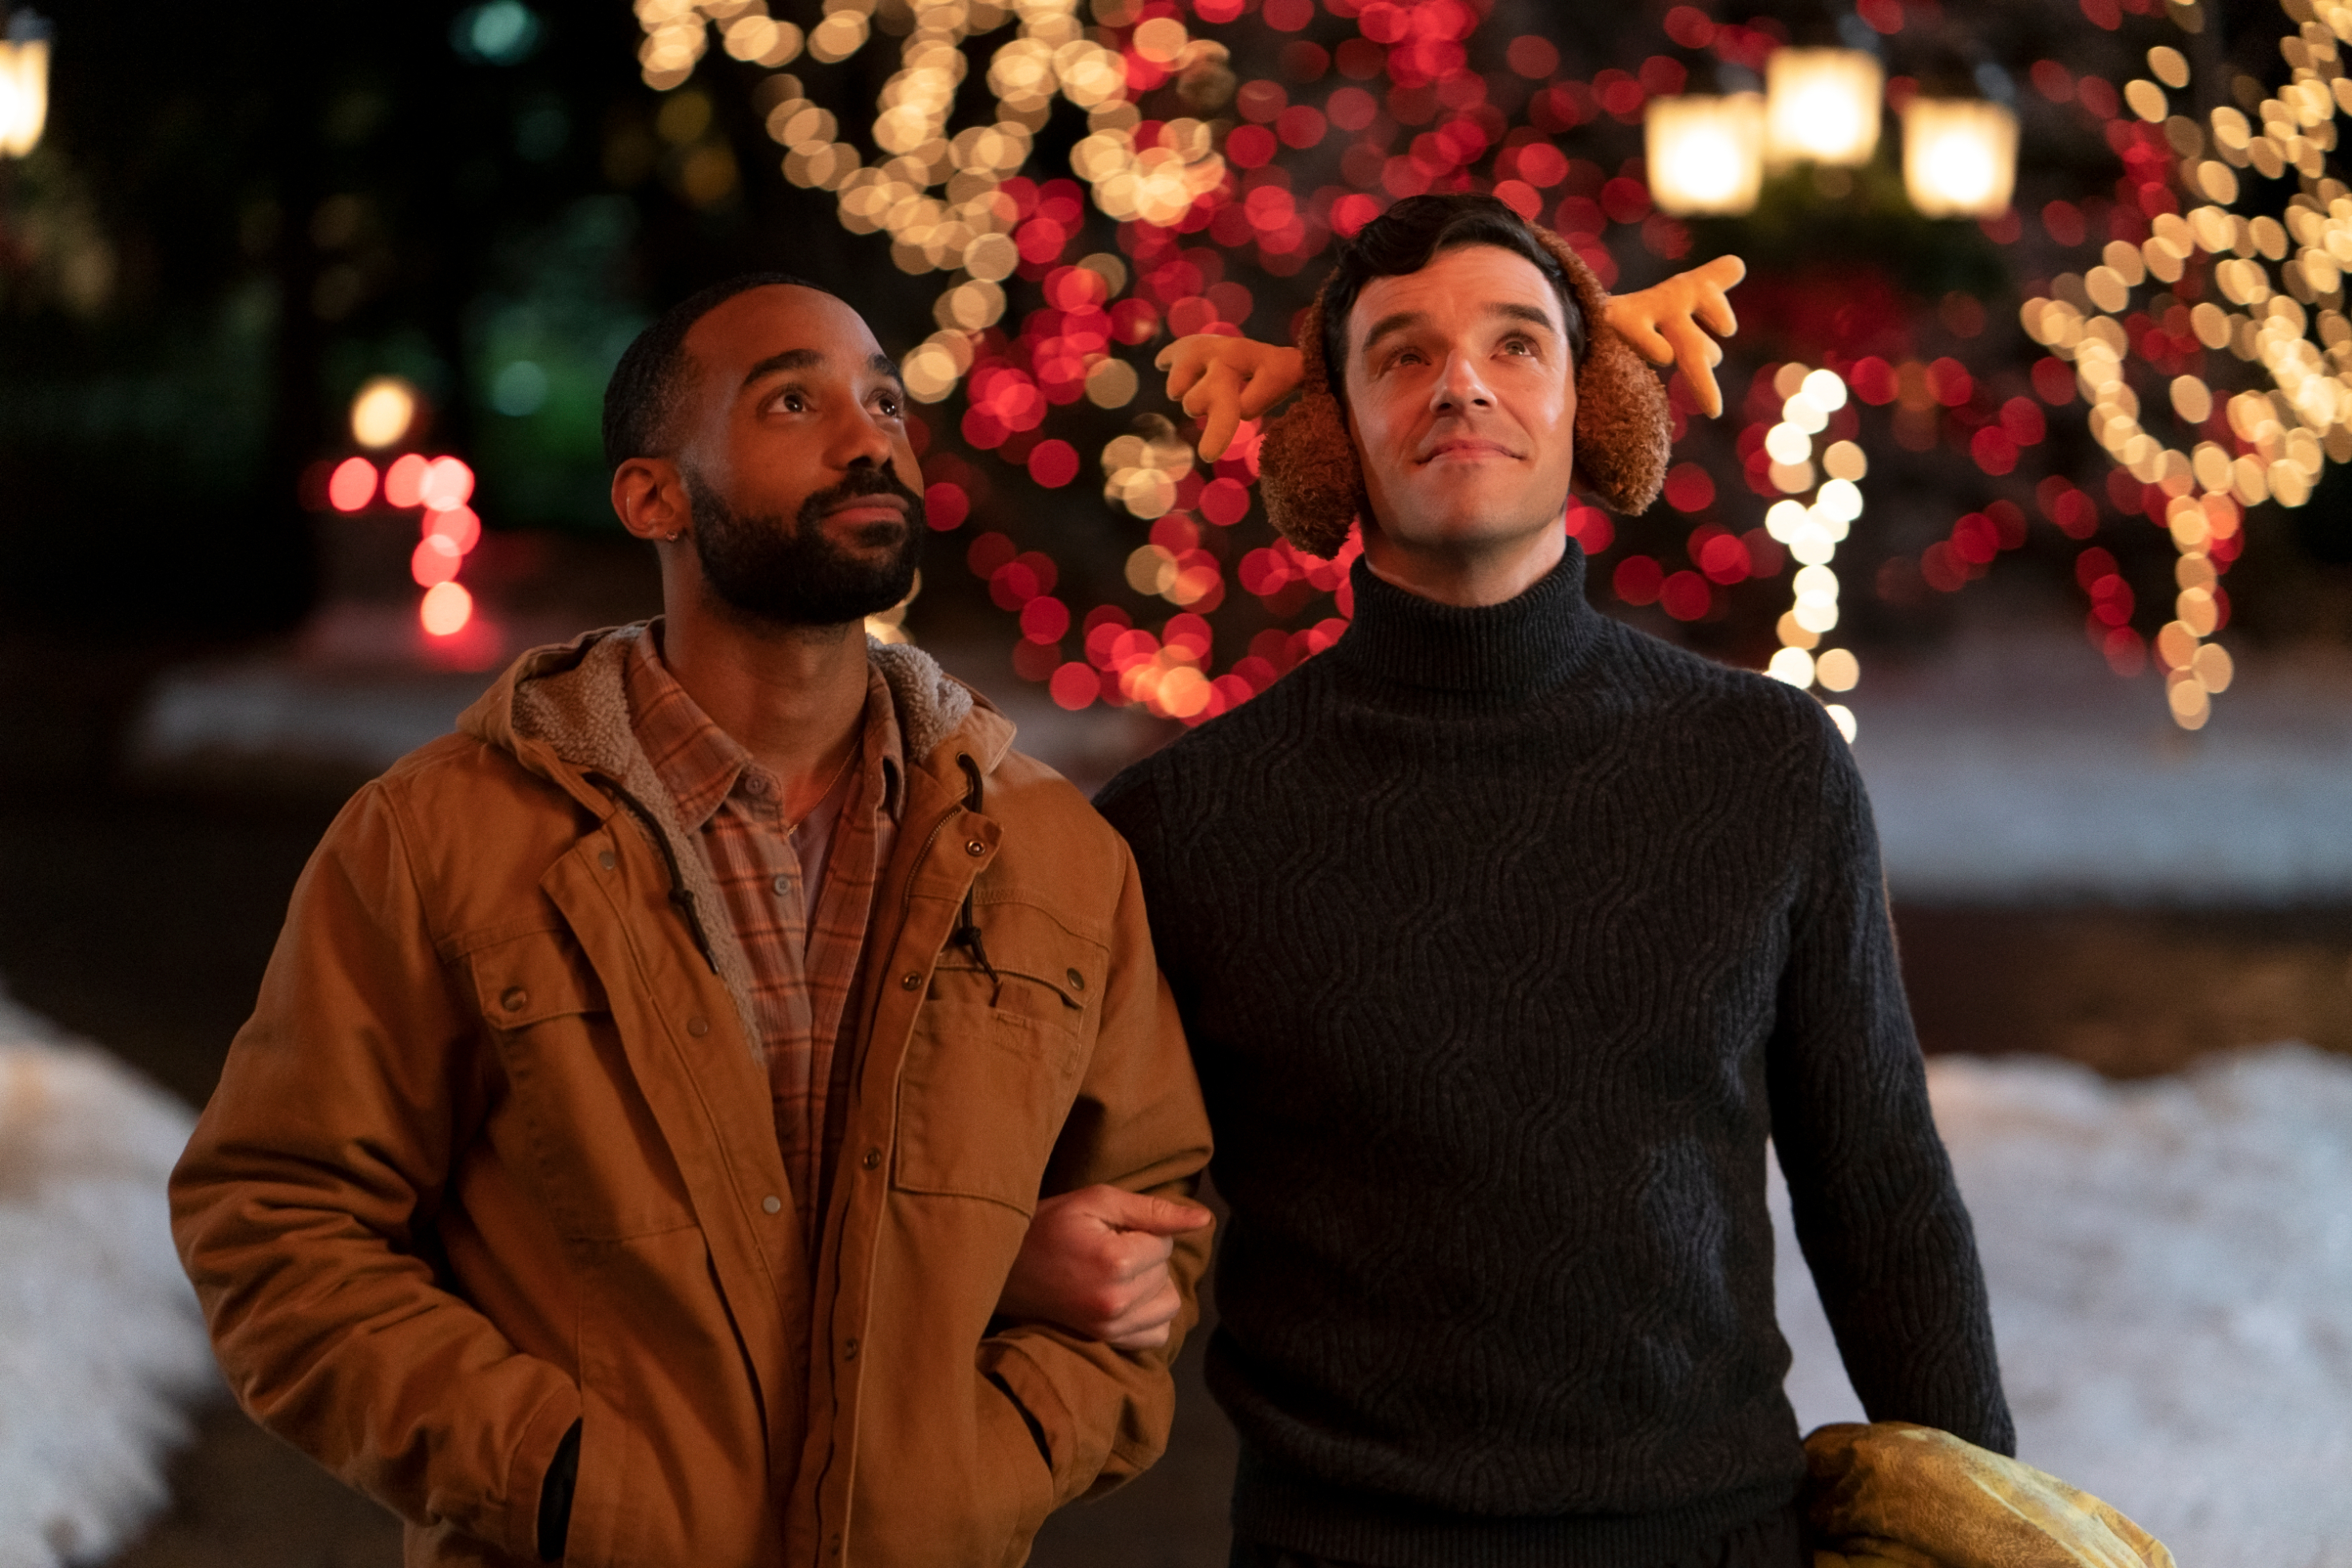 michael urie and philemon chambers linking arms and looking up at christmas lights